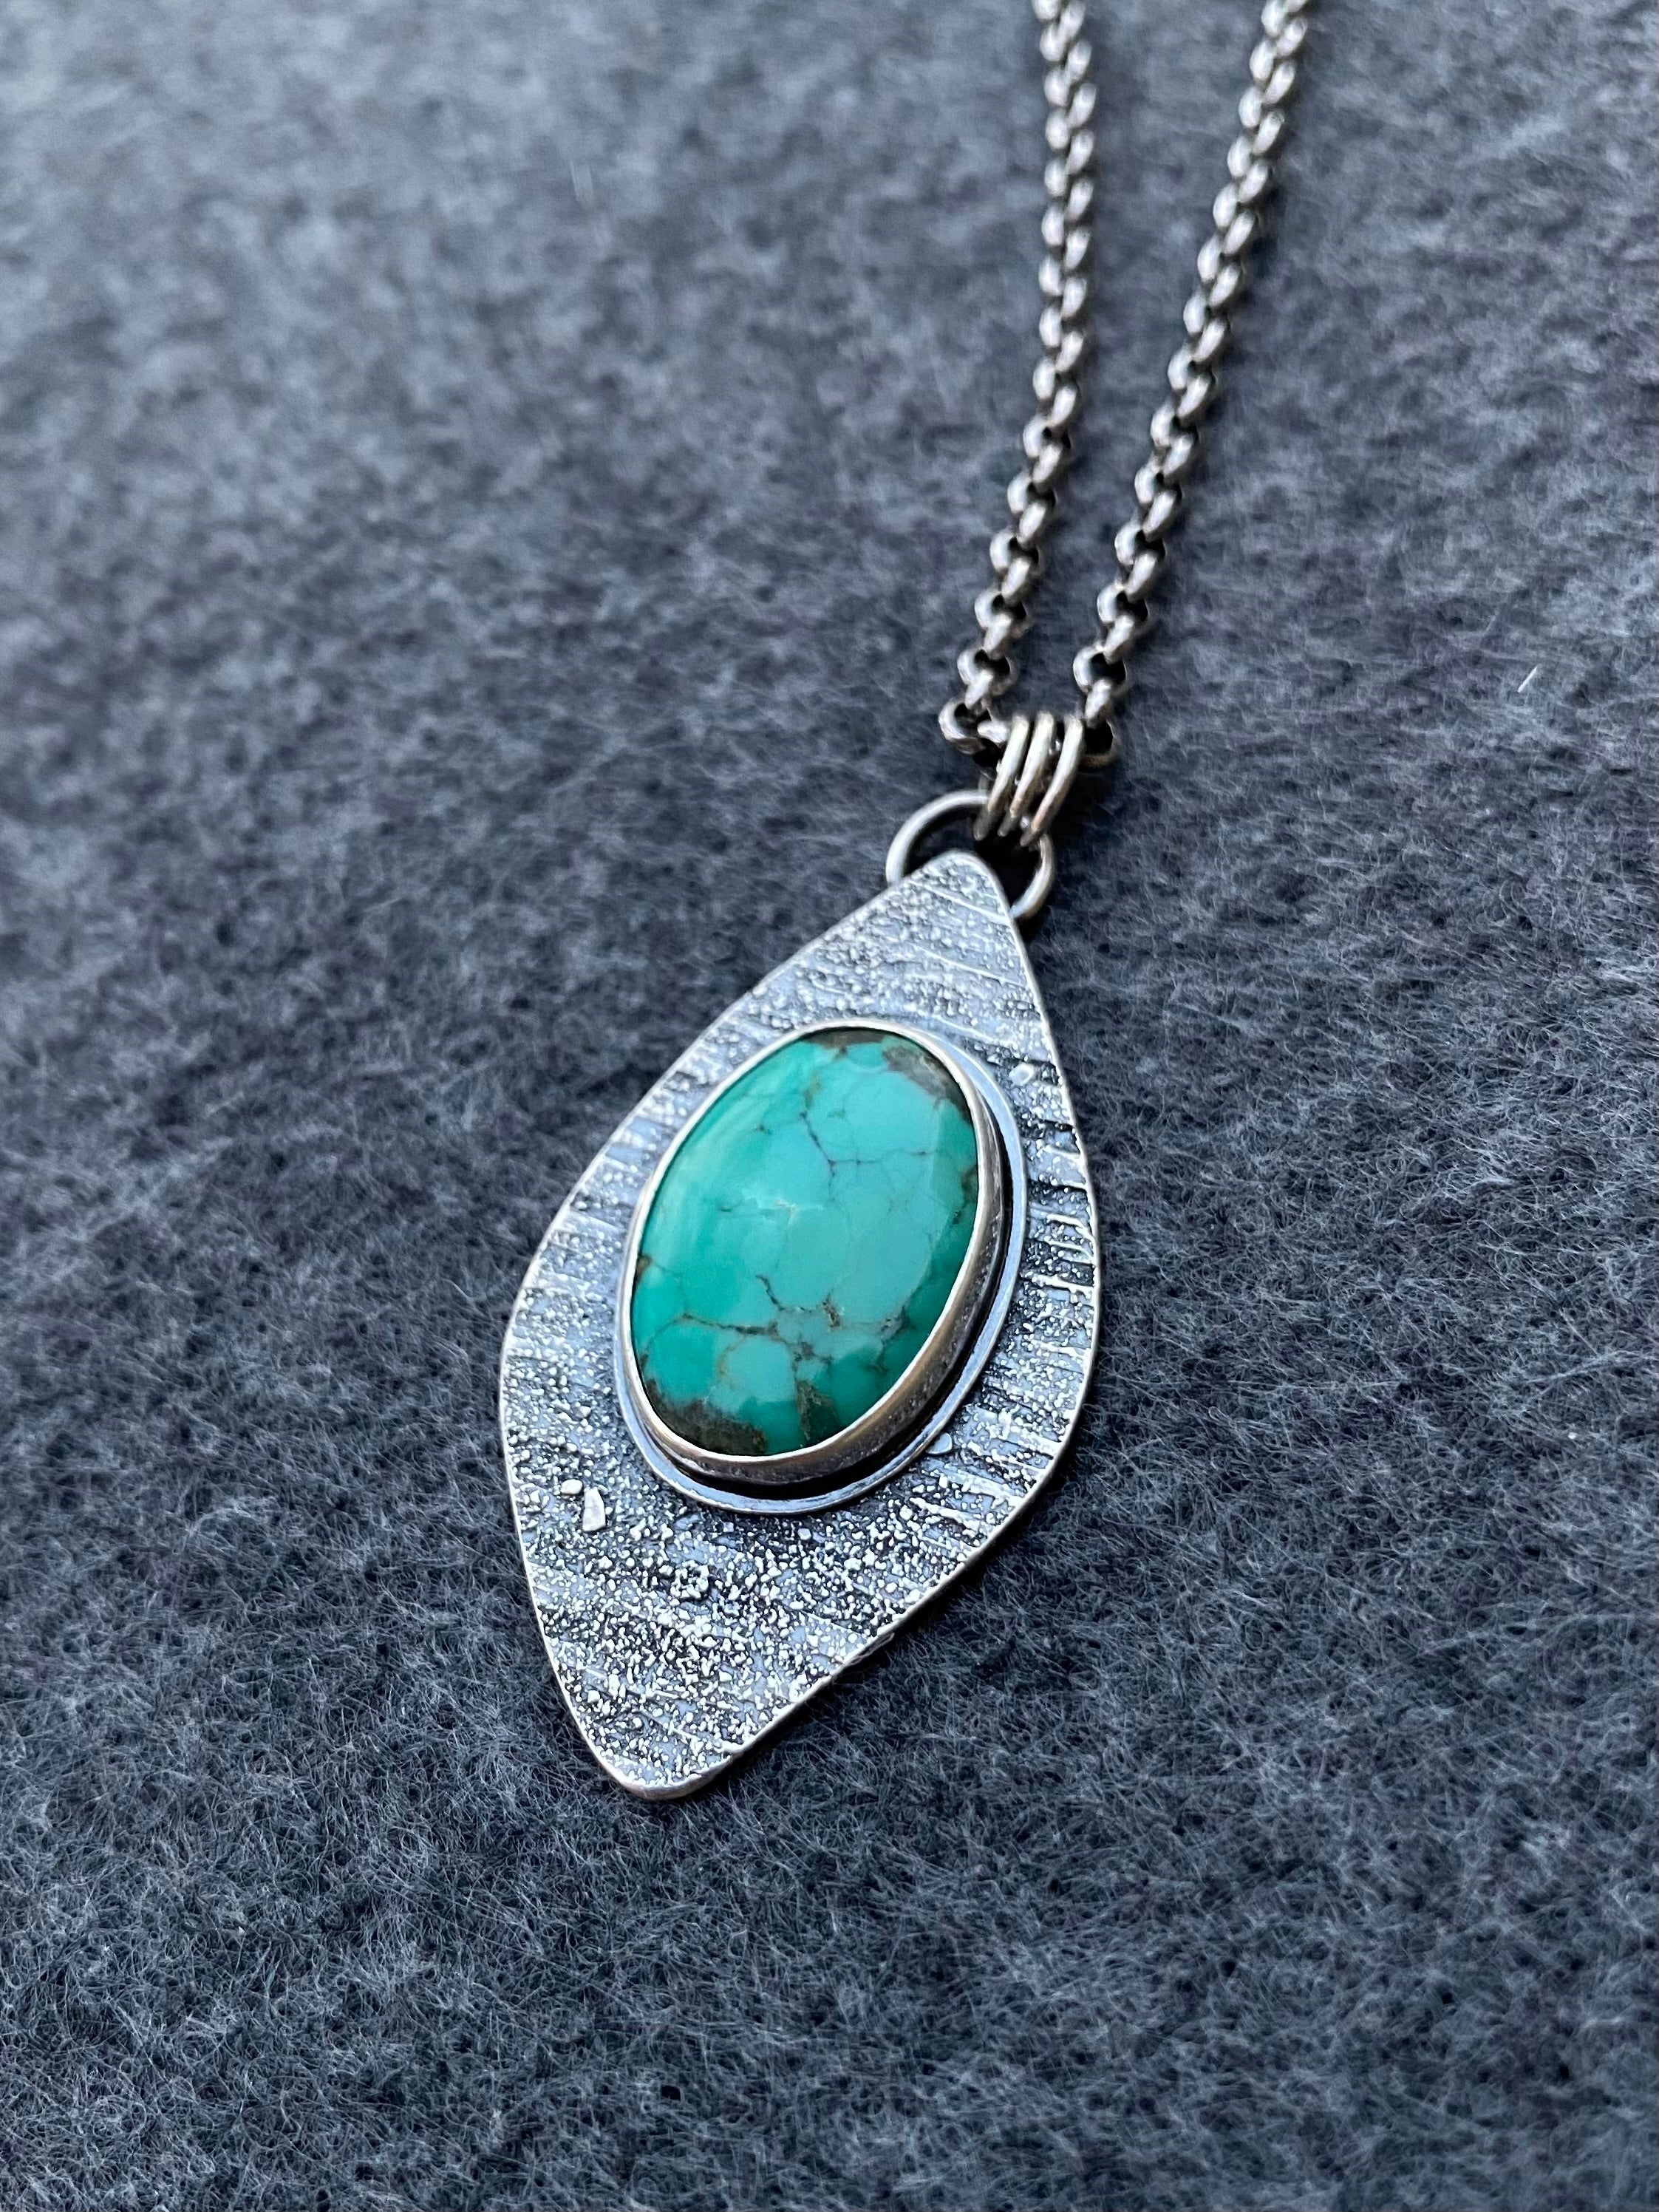 Stardust Pendant Necklace with Turquoise and Sterling Silver #2